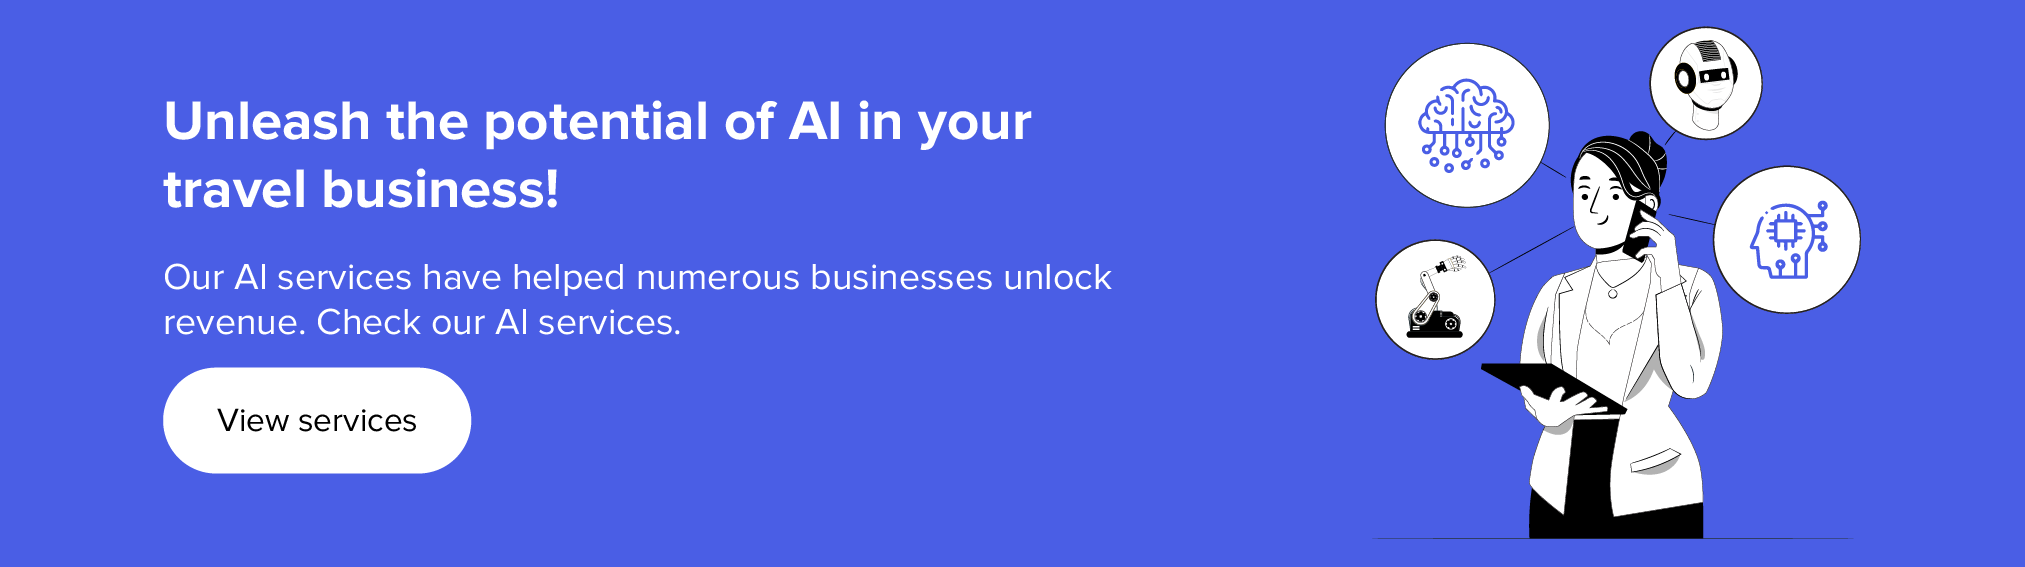 Unleash the potential of AI